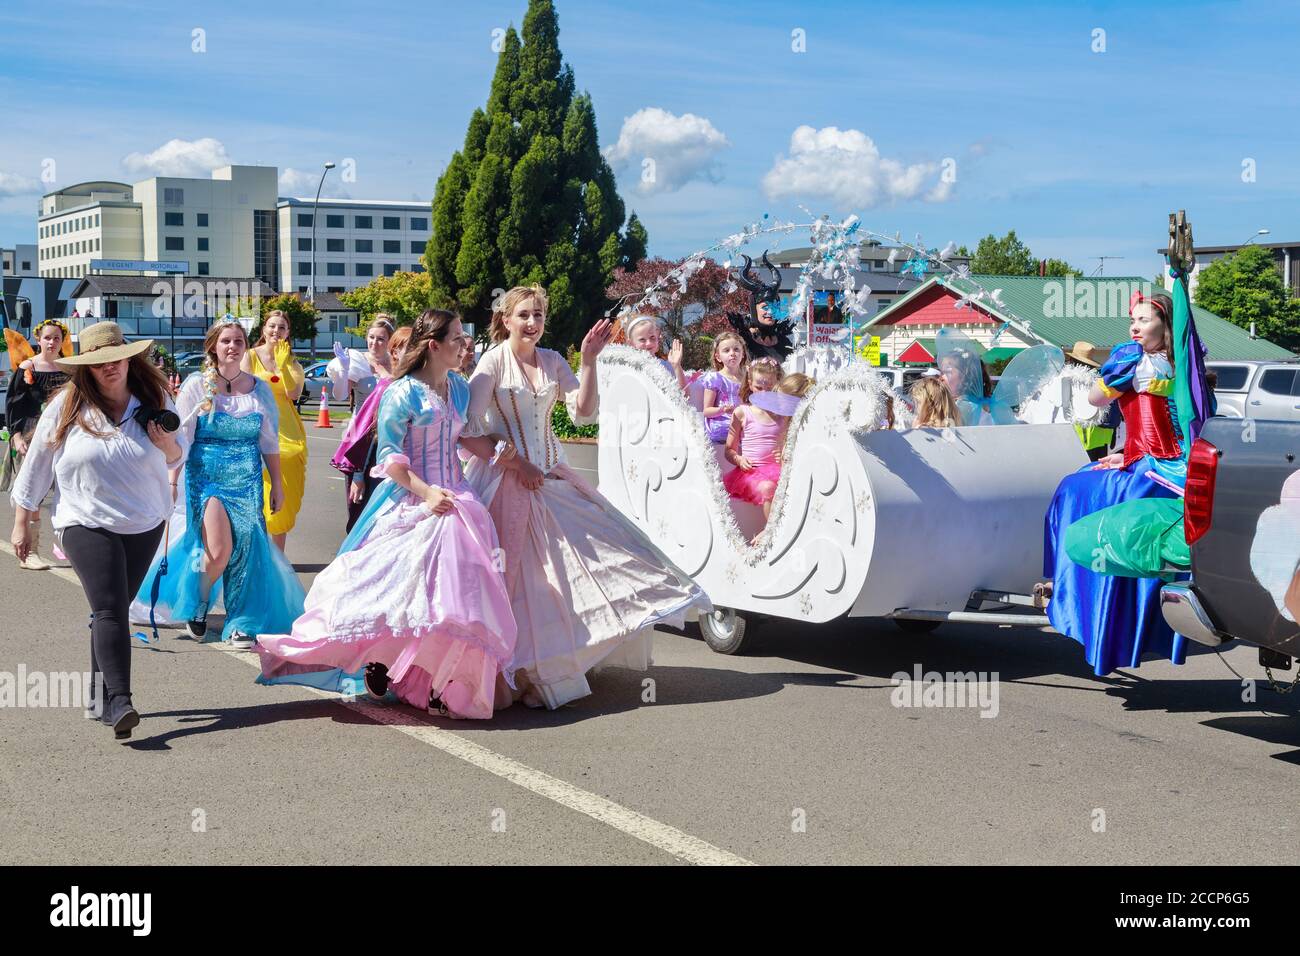 Young women and girls dressed as princesses, taking part in a Christmas parade in Rotorua, New Zealand. December 8 208 Stock Photo